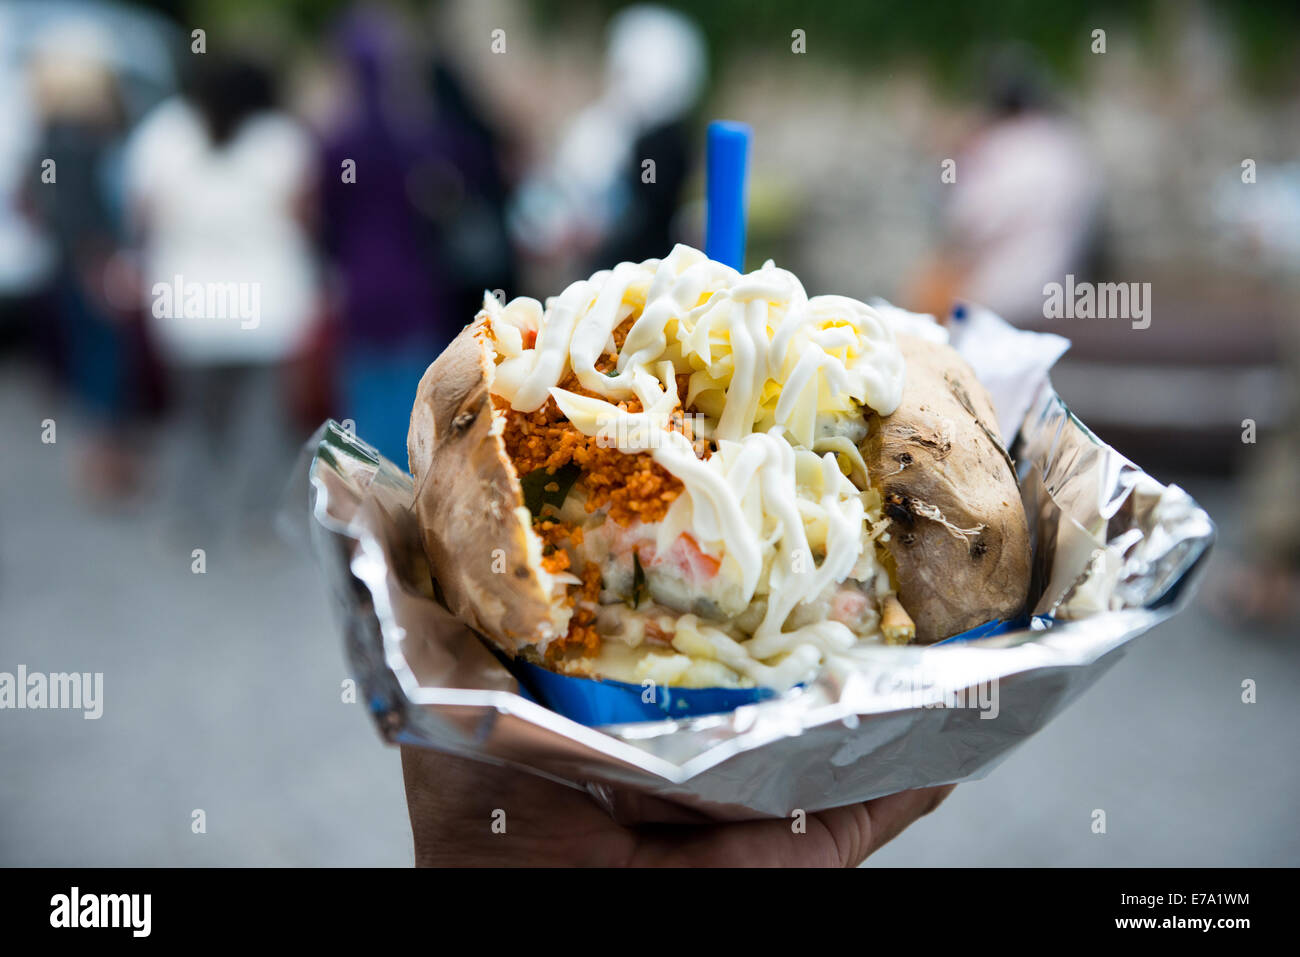 Kumpir- Istanbul style of baked potato stuffed with different fillings. Stock Photo